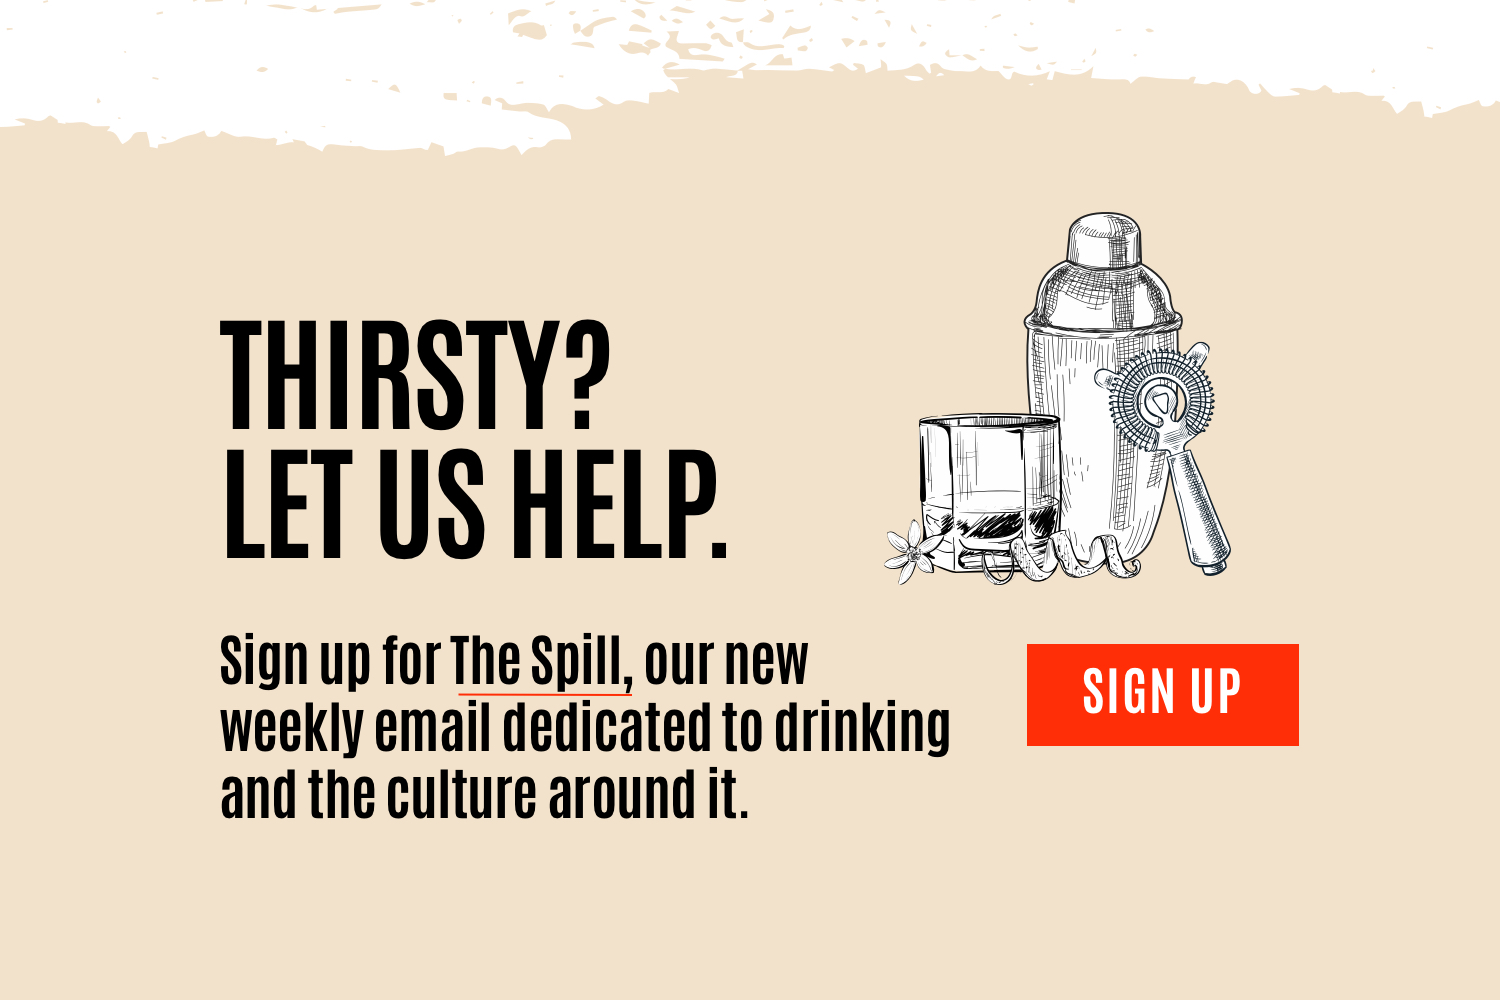 Sign up for The Spill